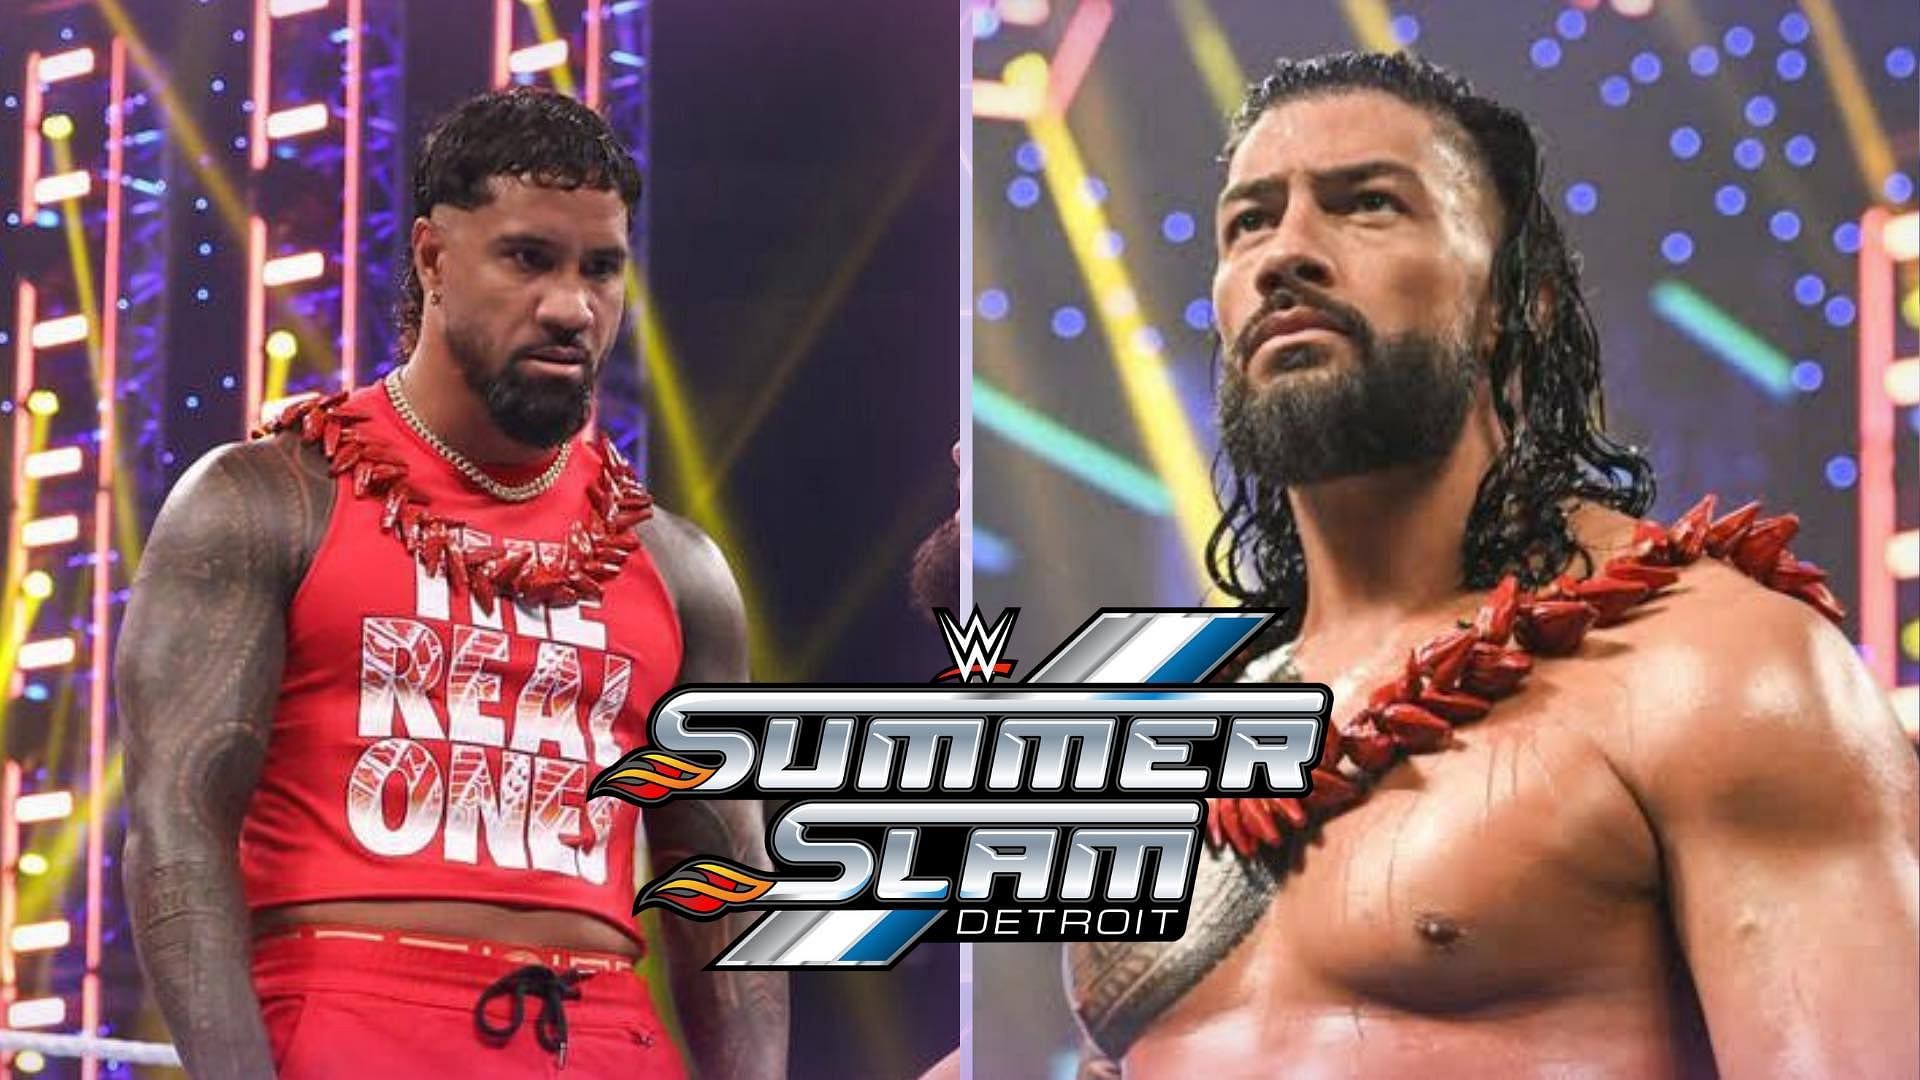 10 new shows including WWE SummerSlam 2023 will be available this weekend